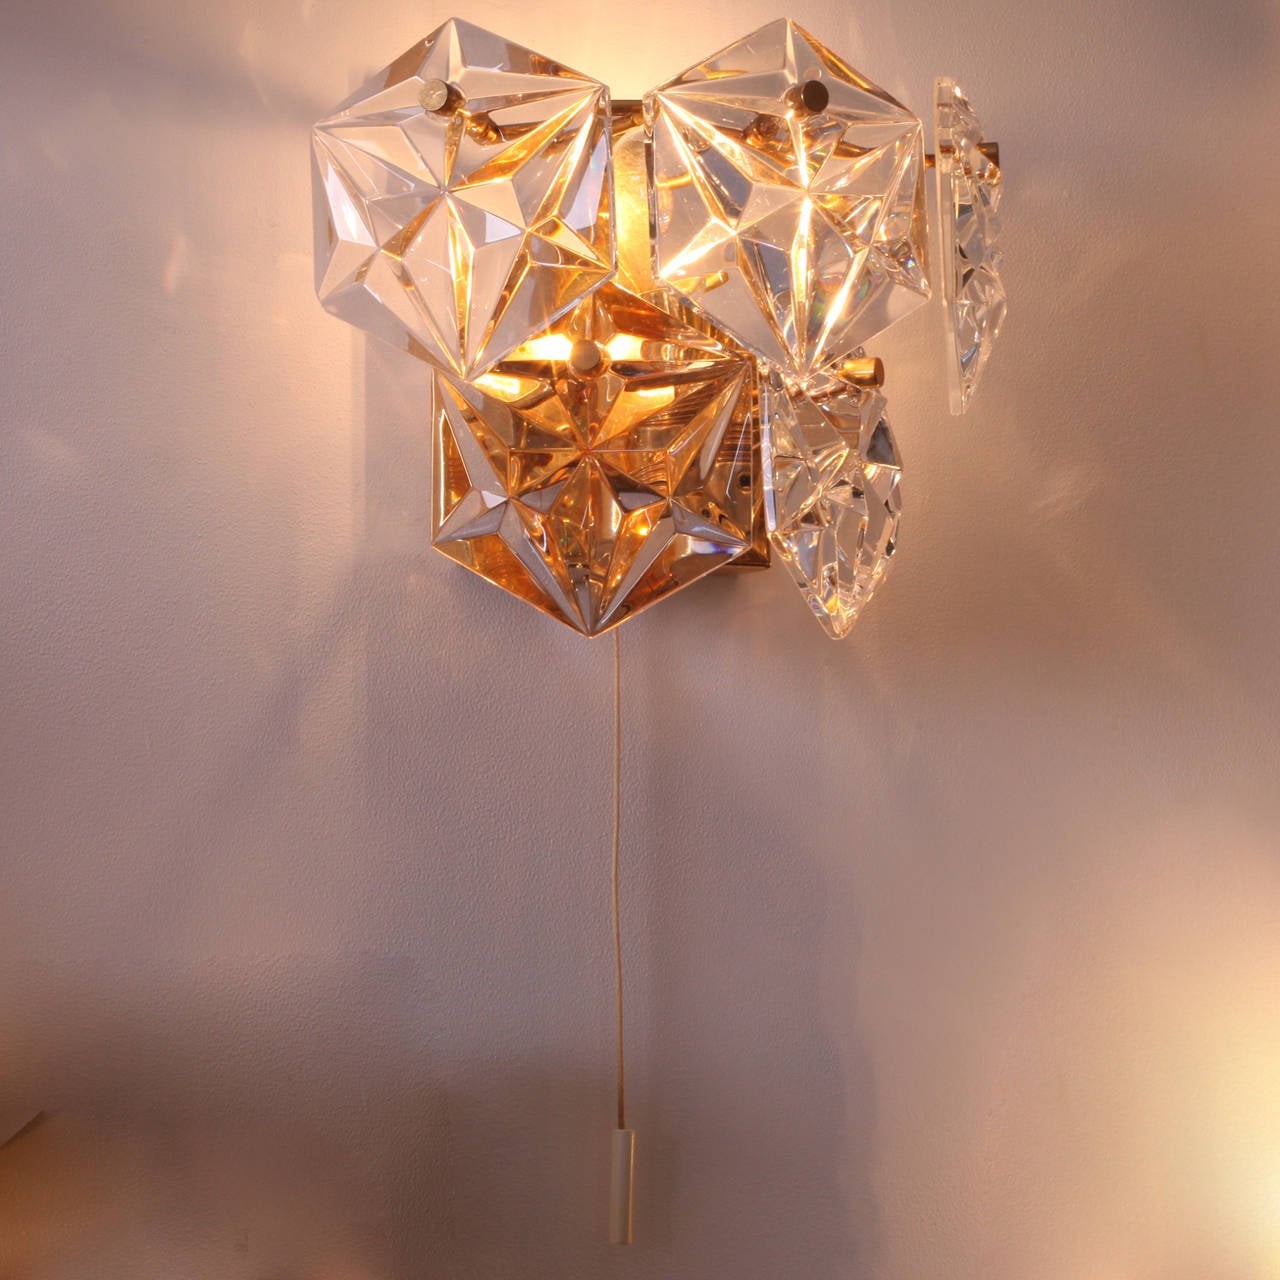 Mid-Century Modern 1 of 2 Pair of Crystal Glass Sconces or Wall Lamps by Kinkeldey For Sale